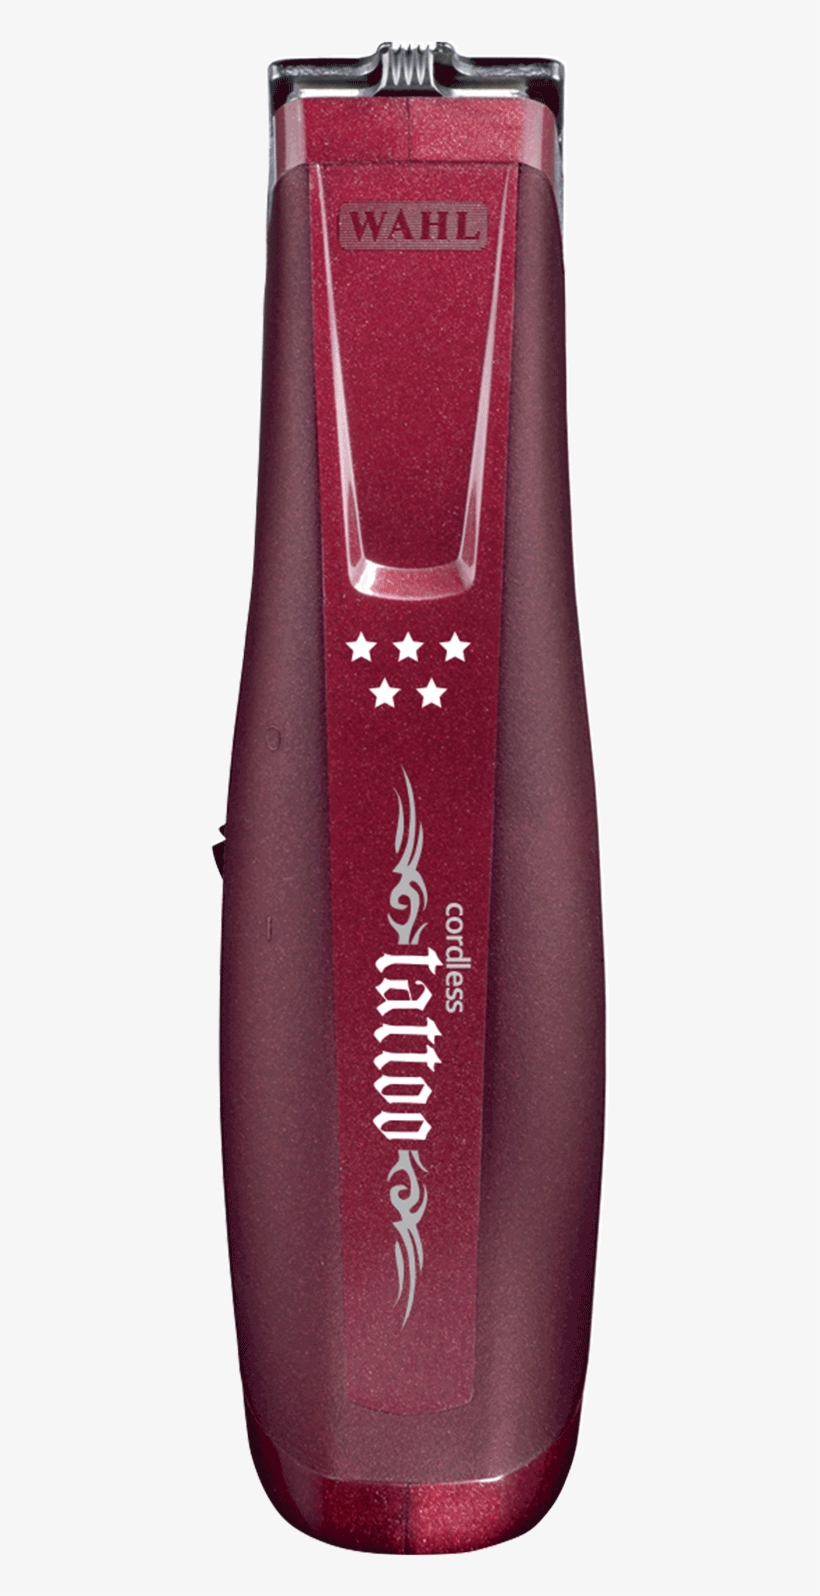 5 Star Cordless Tattoo Trimmer - Wahl Hair Tattoo Clippers, transparent png #8614357